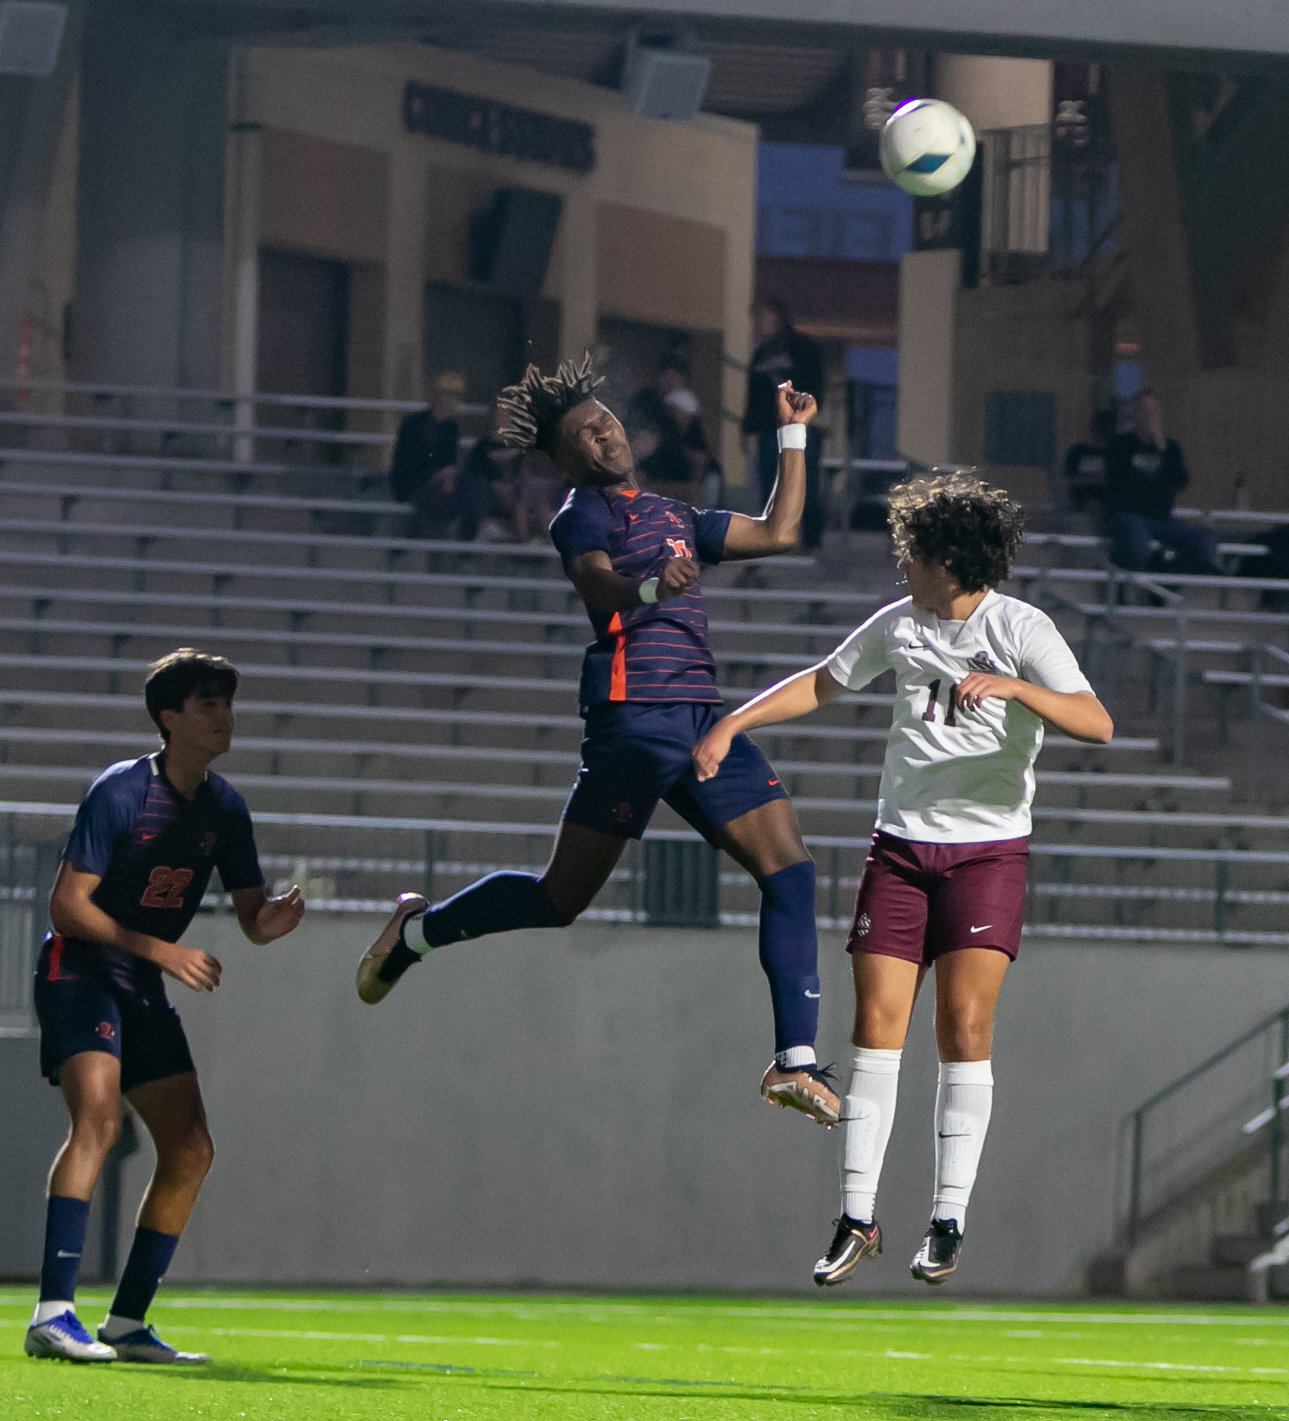 Daniel Ejerenwa heads a ball during Friday's Class 6A Regional Quarterfinal game between Seven Lakes and Cinco Ranch at Legacy Stadium.